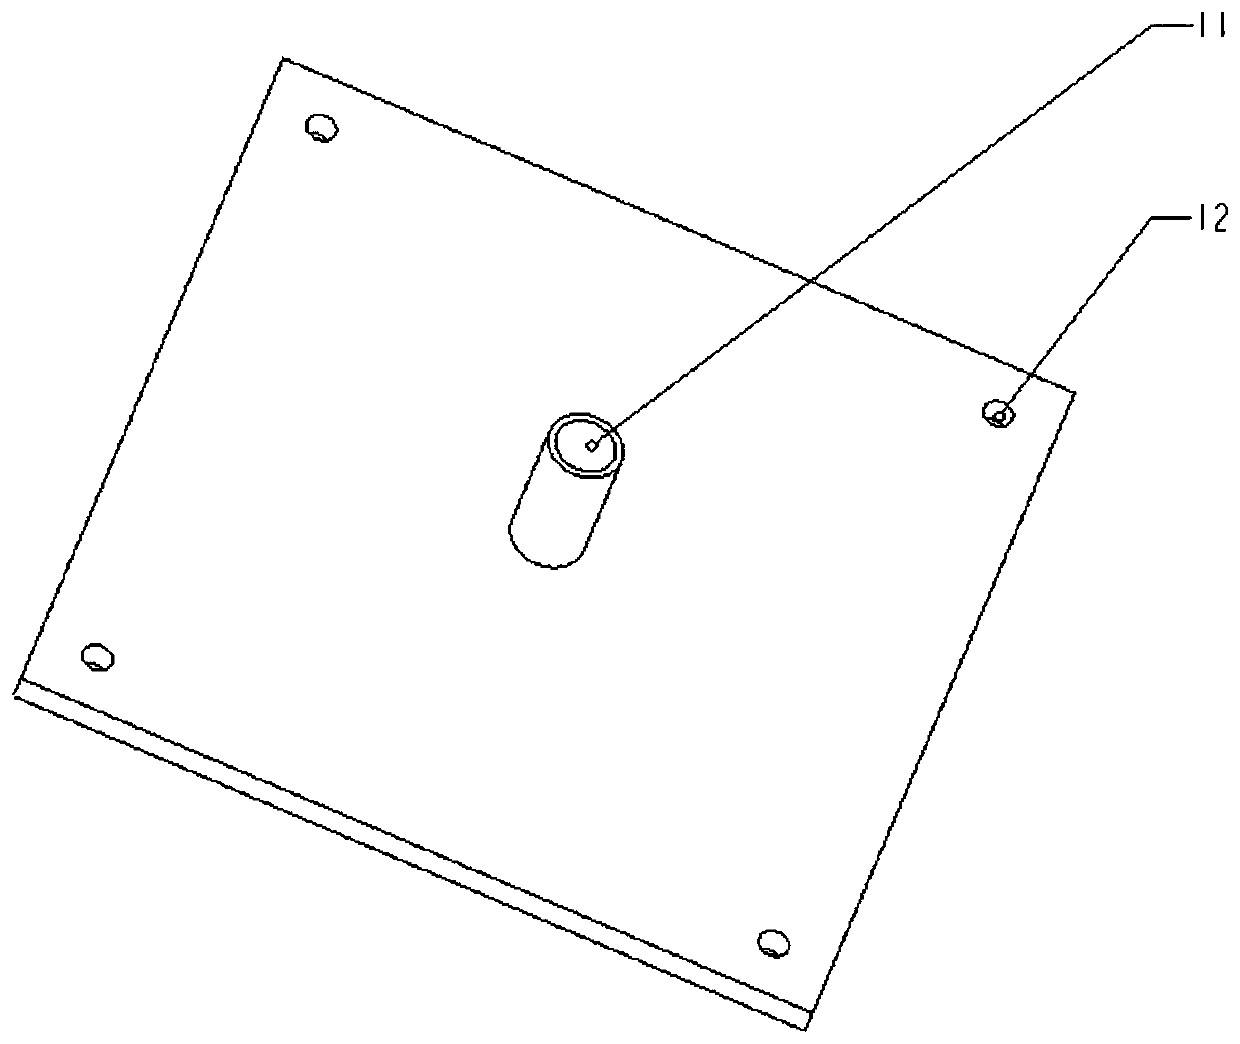 Size-variable clamp for abrasive flow machining of valve block through hole